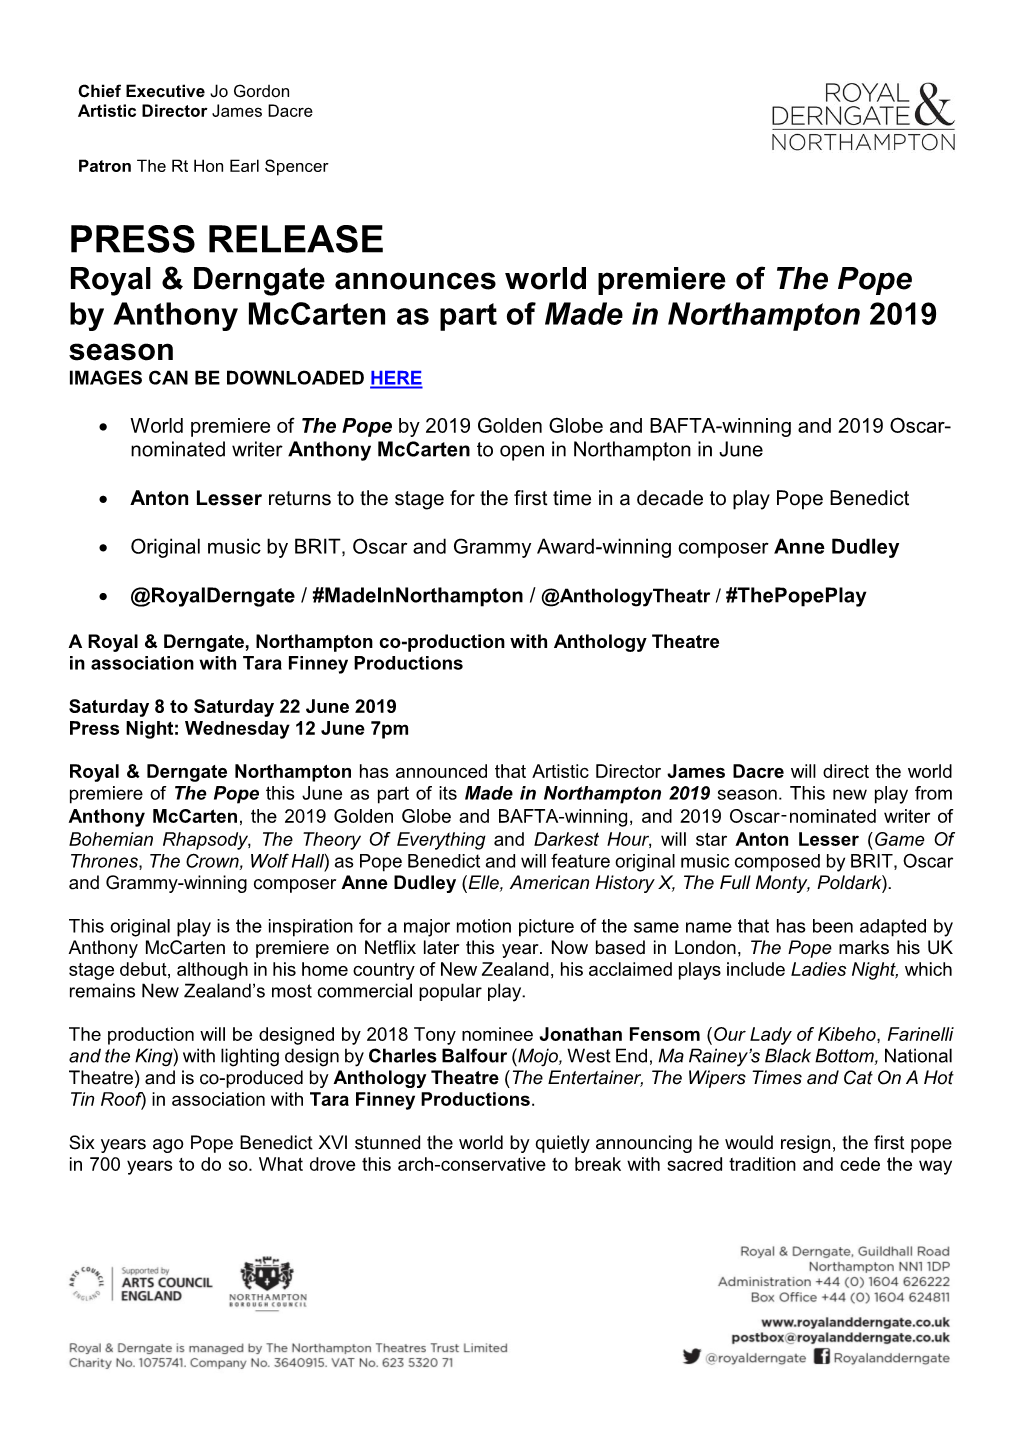 PRESS RELEASE Royal & Derngate Announces World Premiere of the Pope by Anthony Mccarten As Part of Made in Northampton 2019 Season IMAGES CAN BE DOWNLOADED HERE